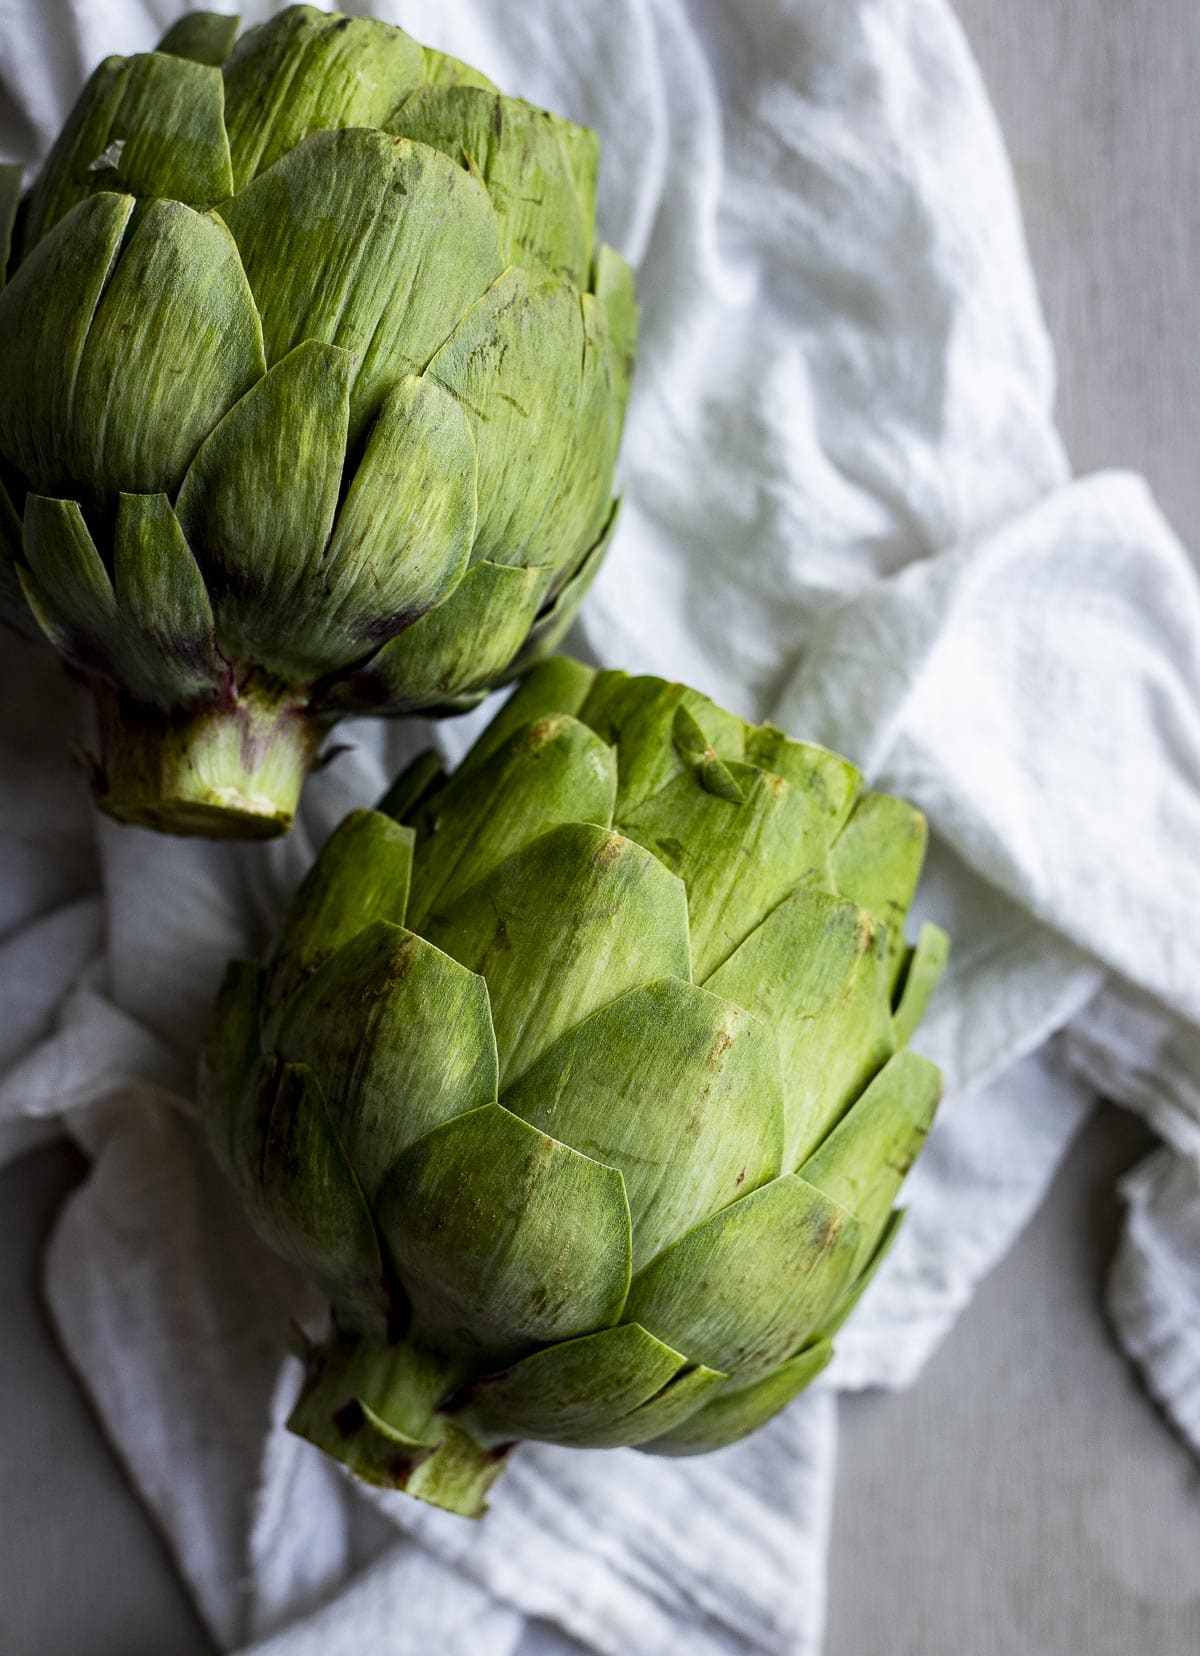 Up close view of two fresh artichokes with the outer leaves trimmed.